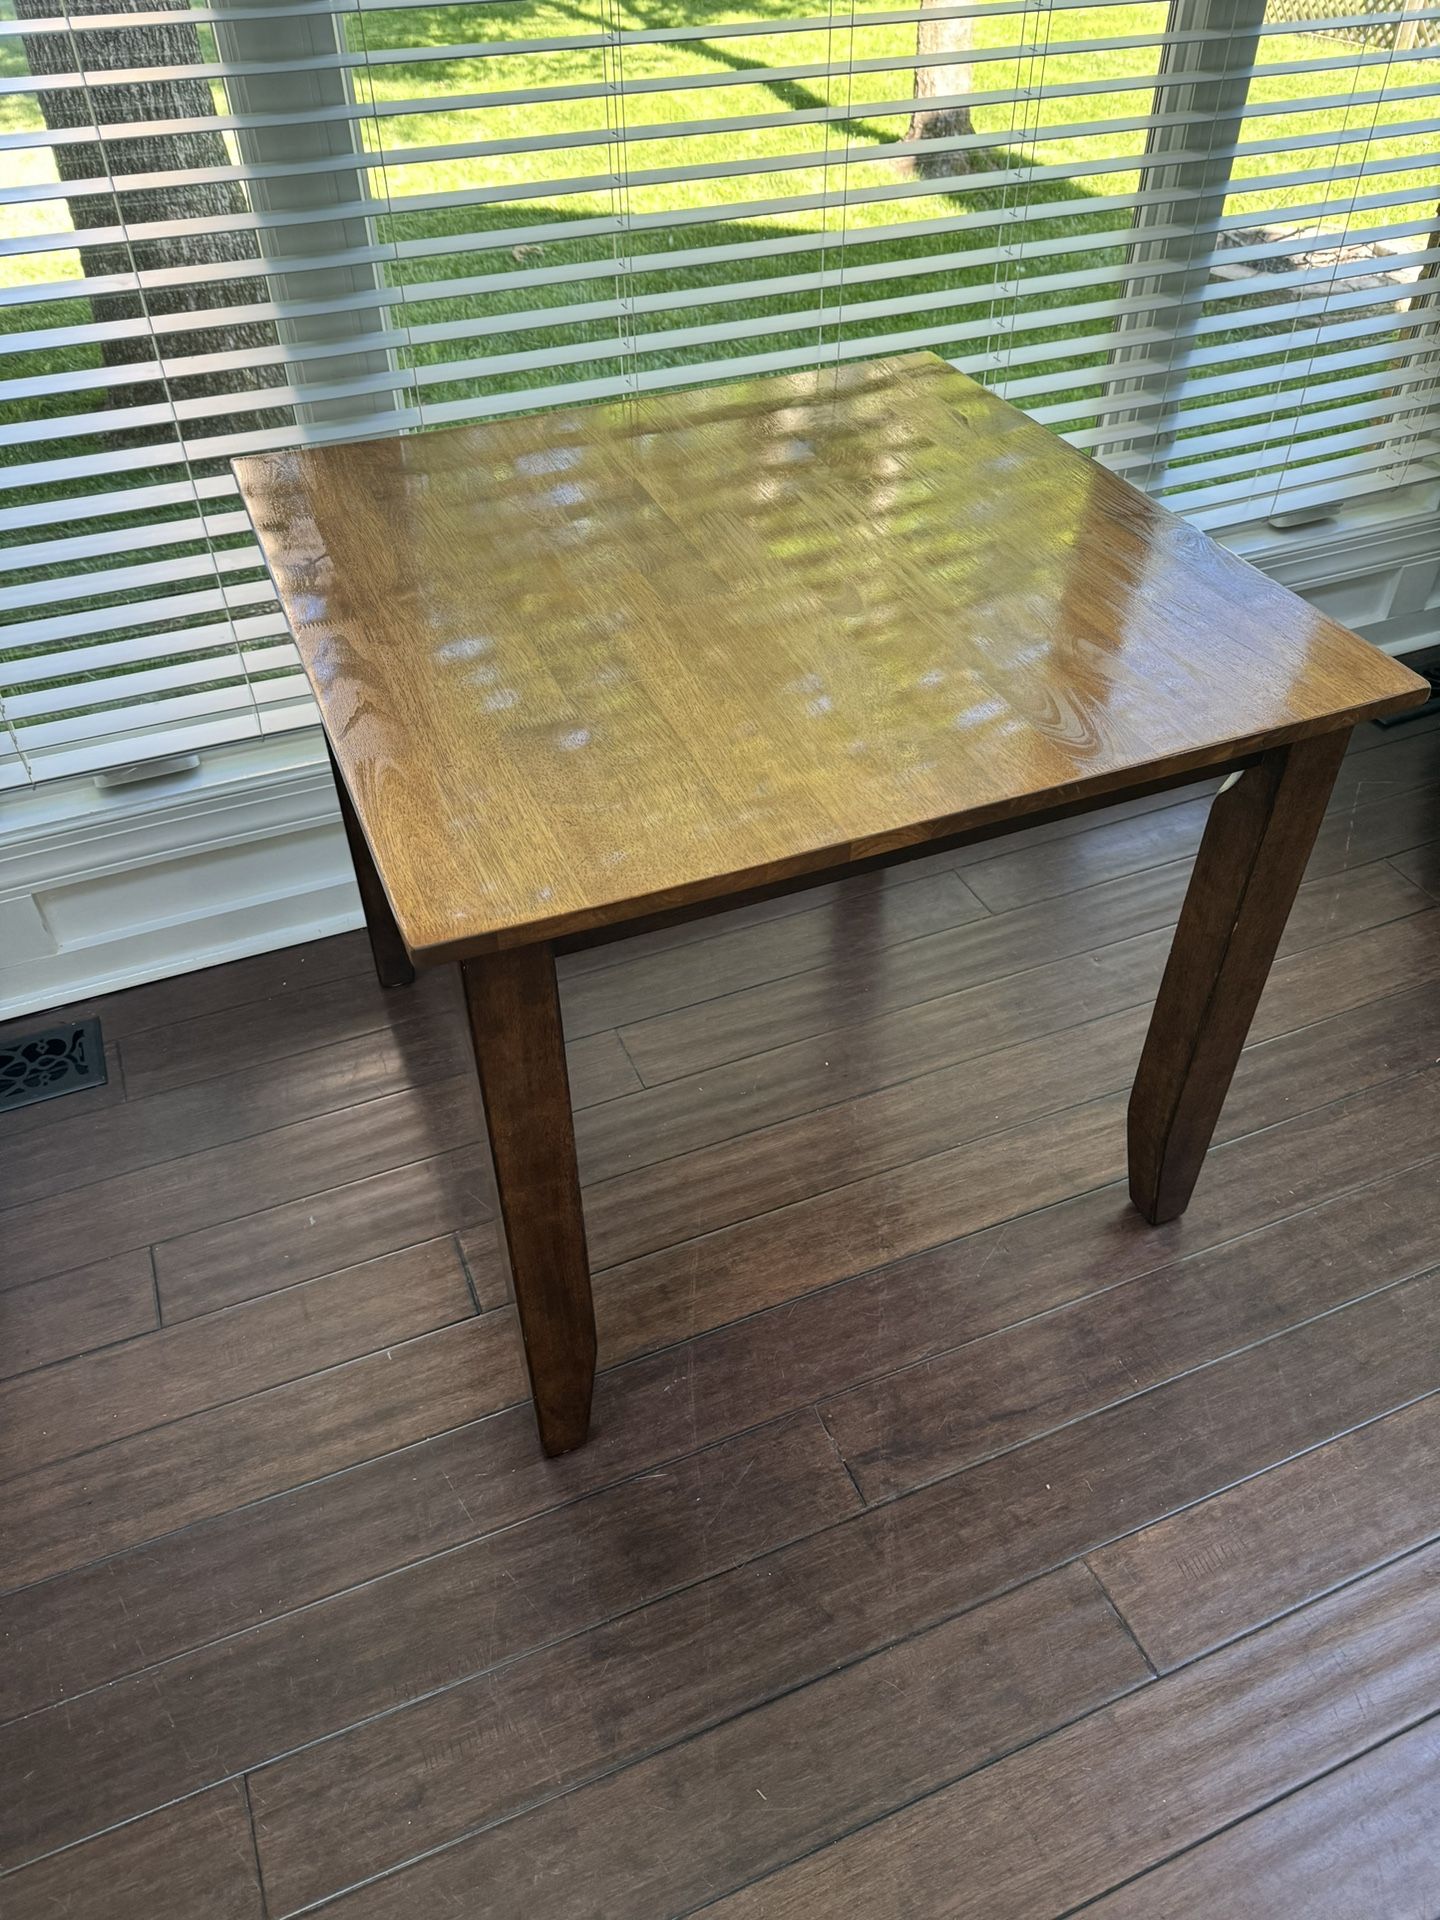 Solid Wood Table $50